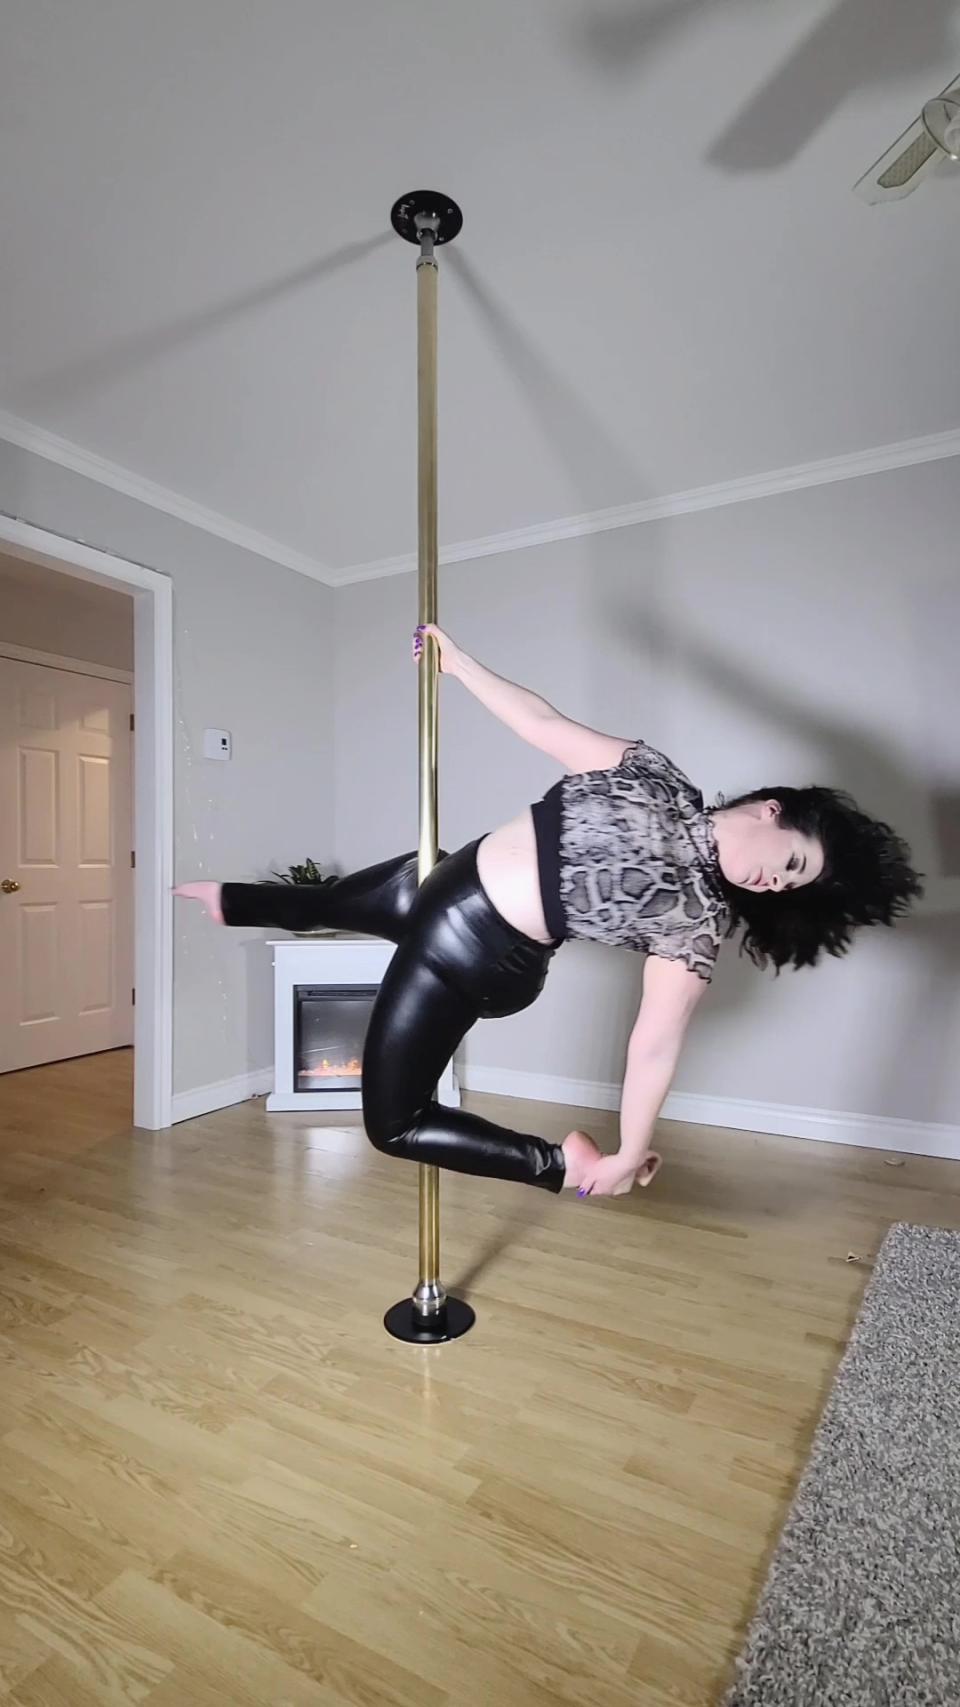 jessica uses pole dancing for weight loss